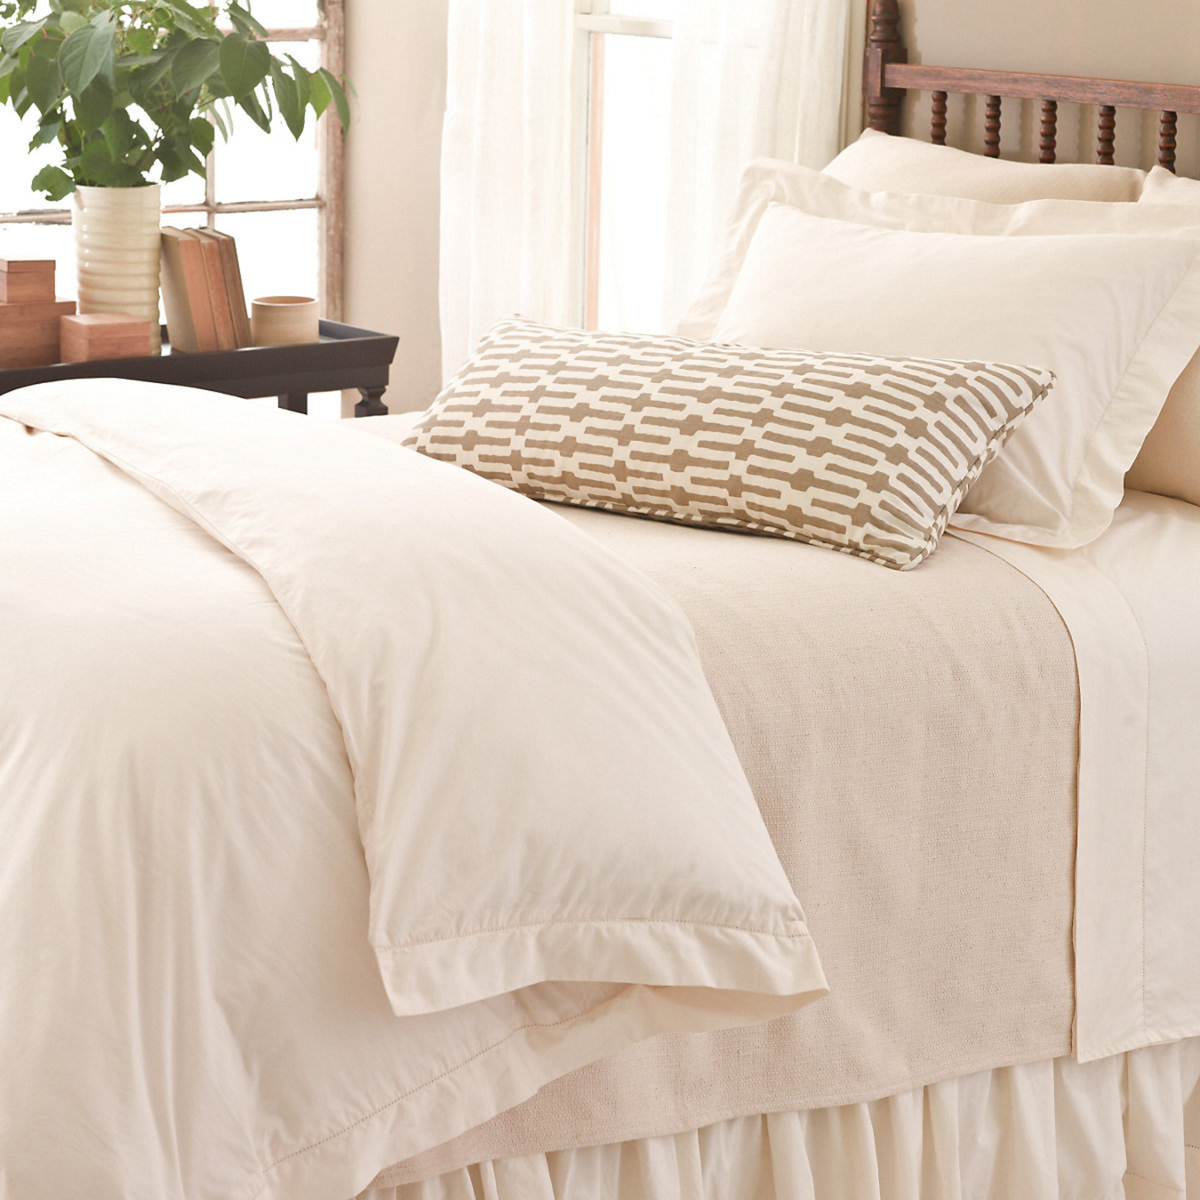 Duvet Cover of Ivory Pine Cone Hill Classic Hemstitch Bedding